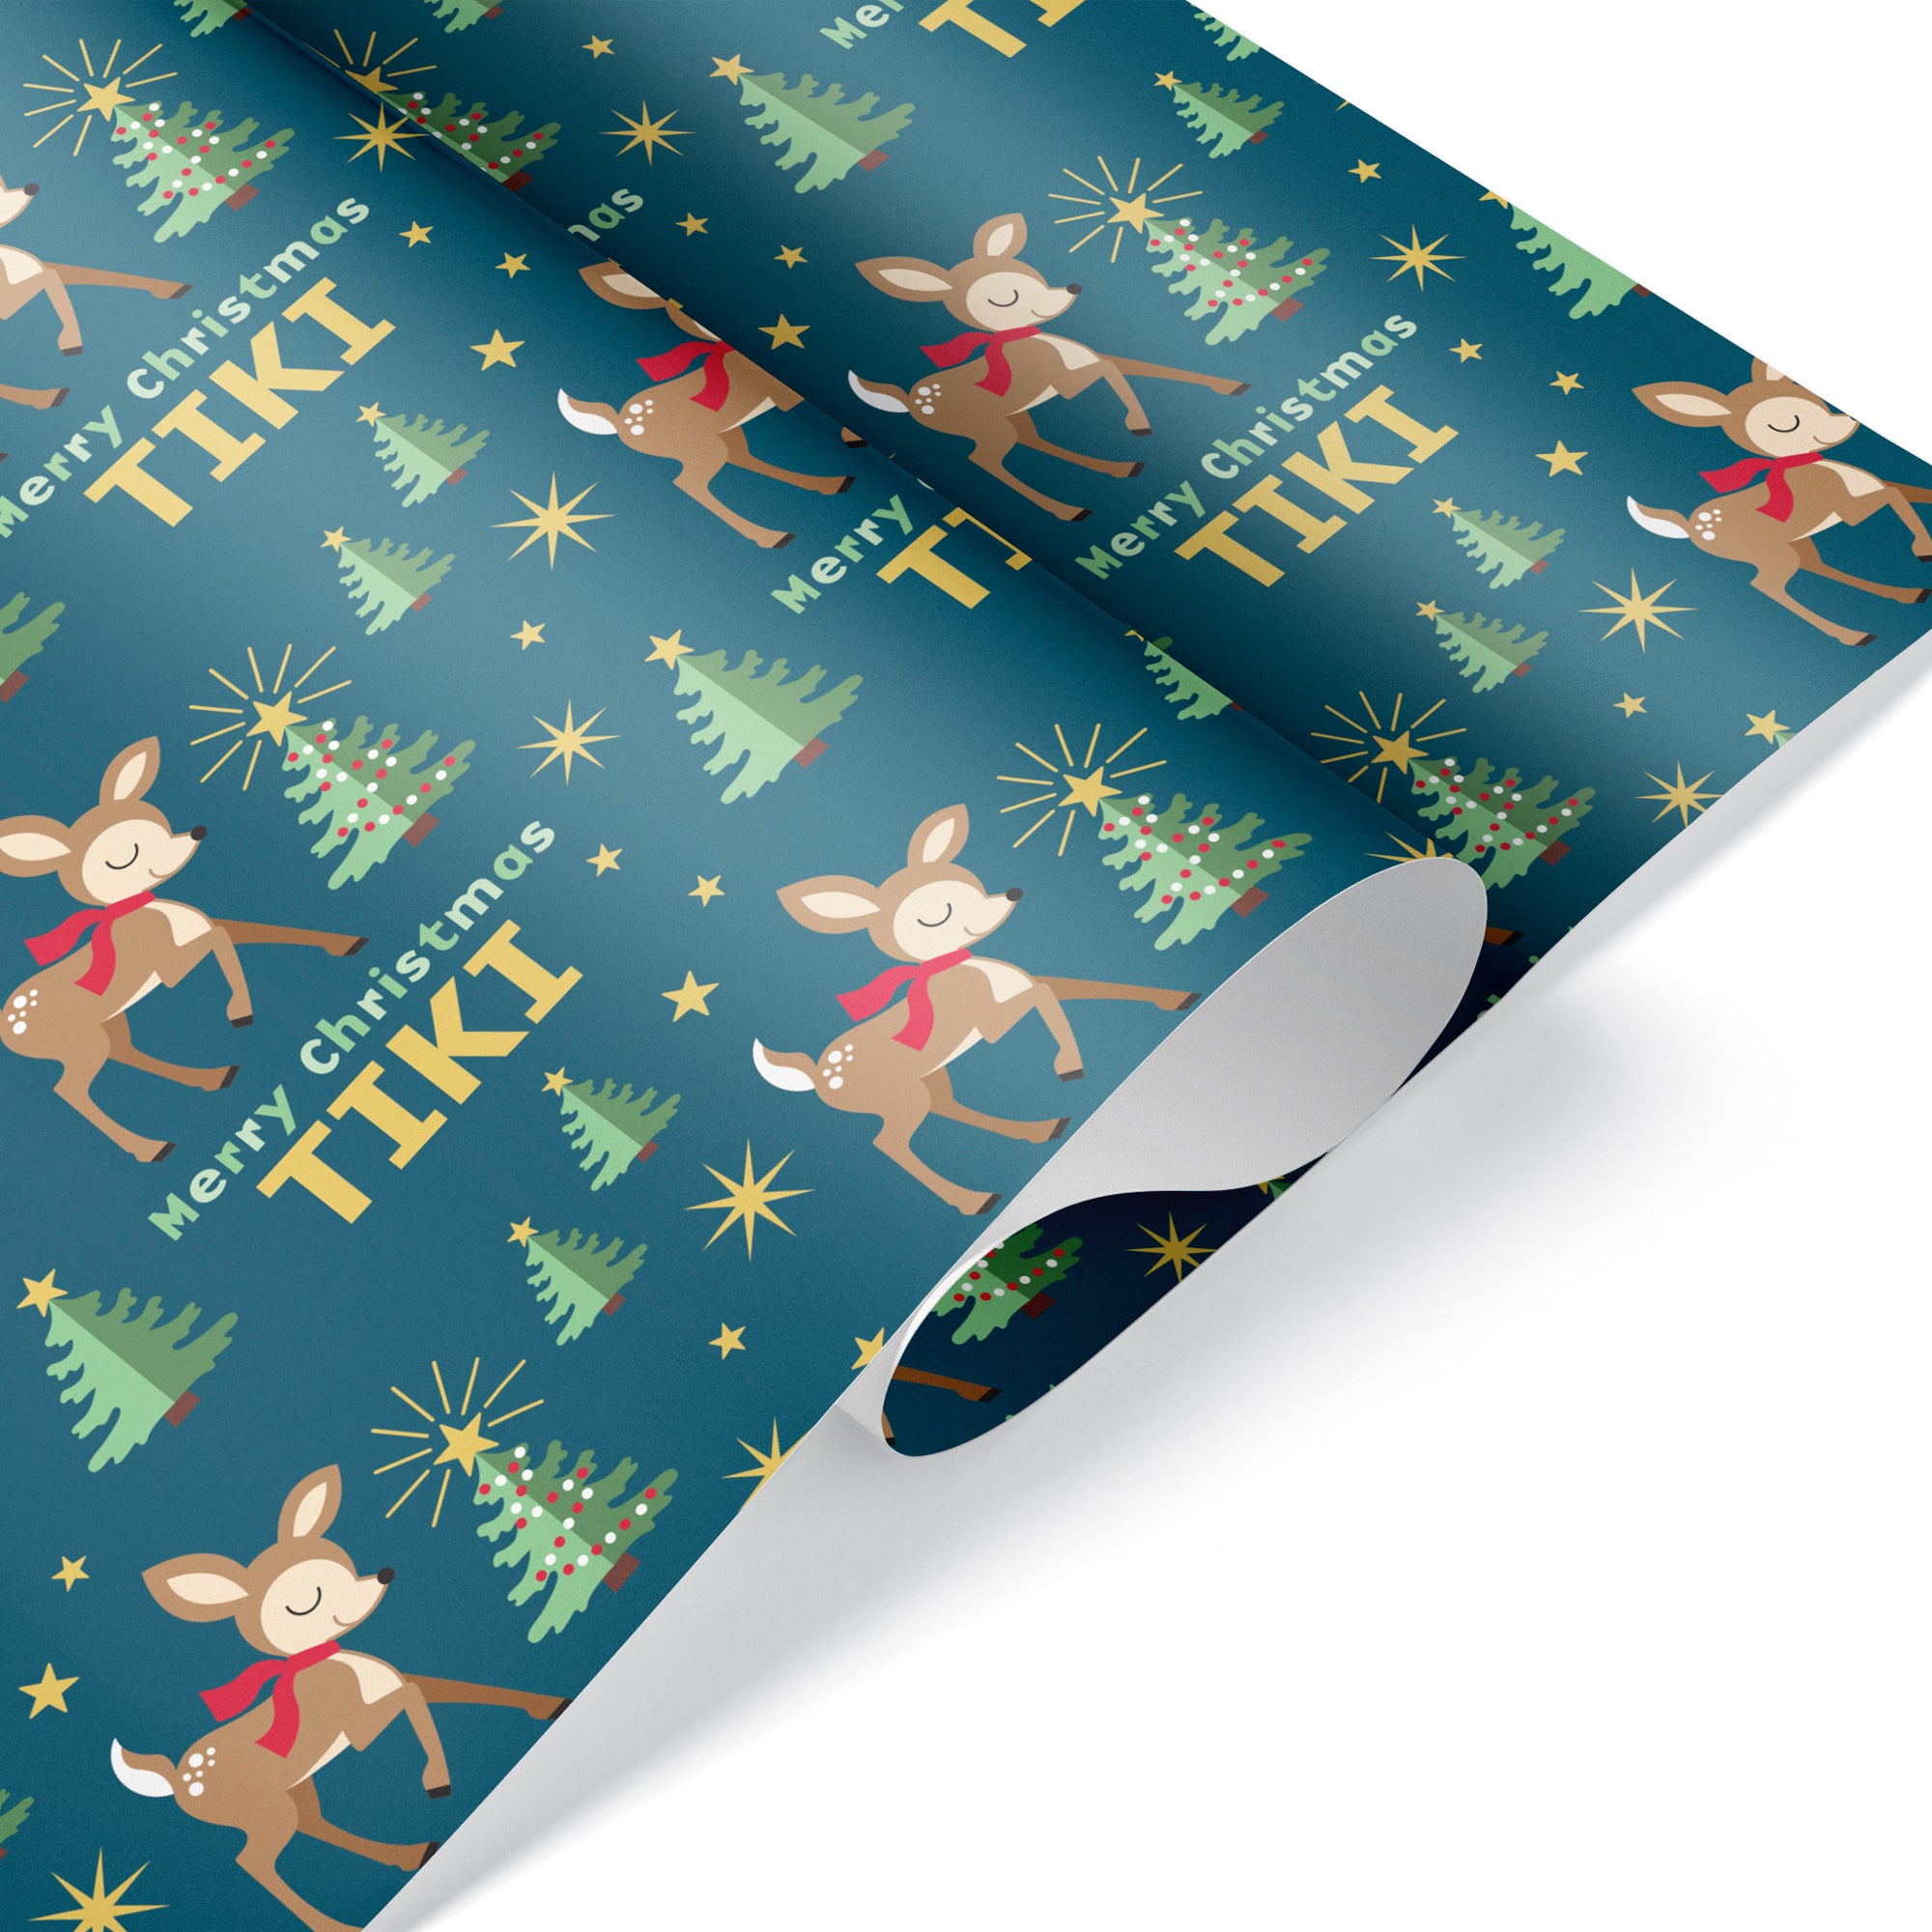 Personalized Nativity Christmas Wrapping Paper - Add Any Name